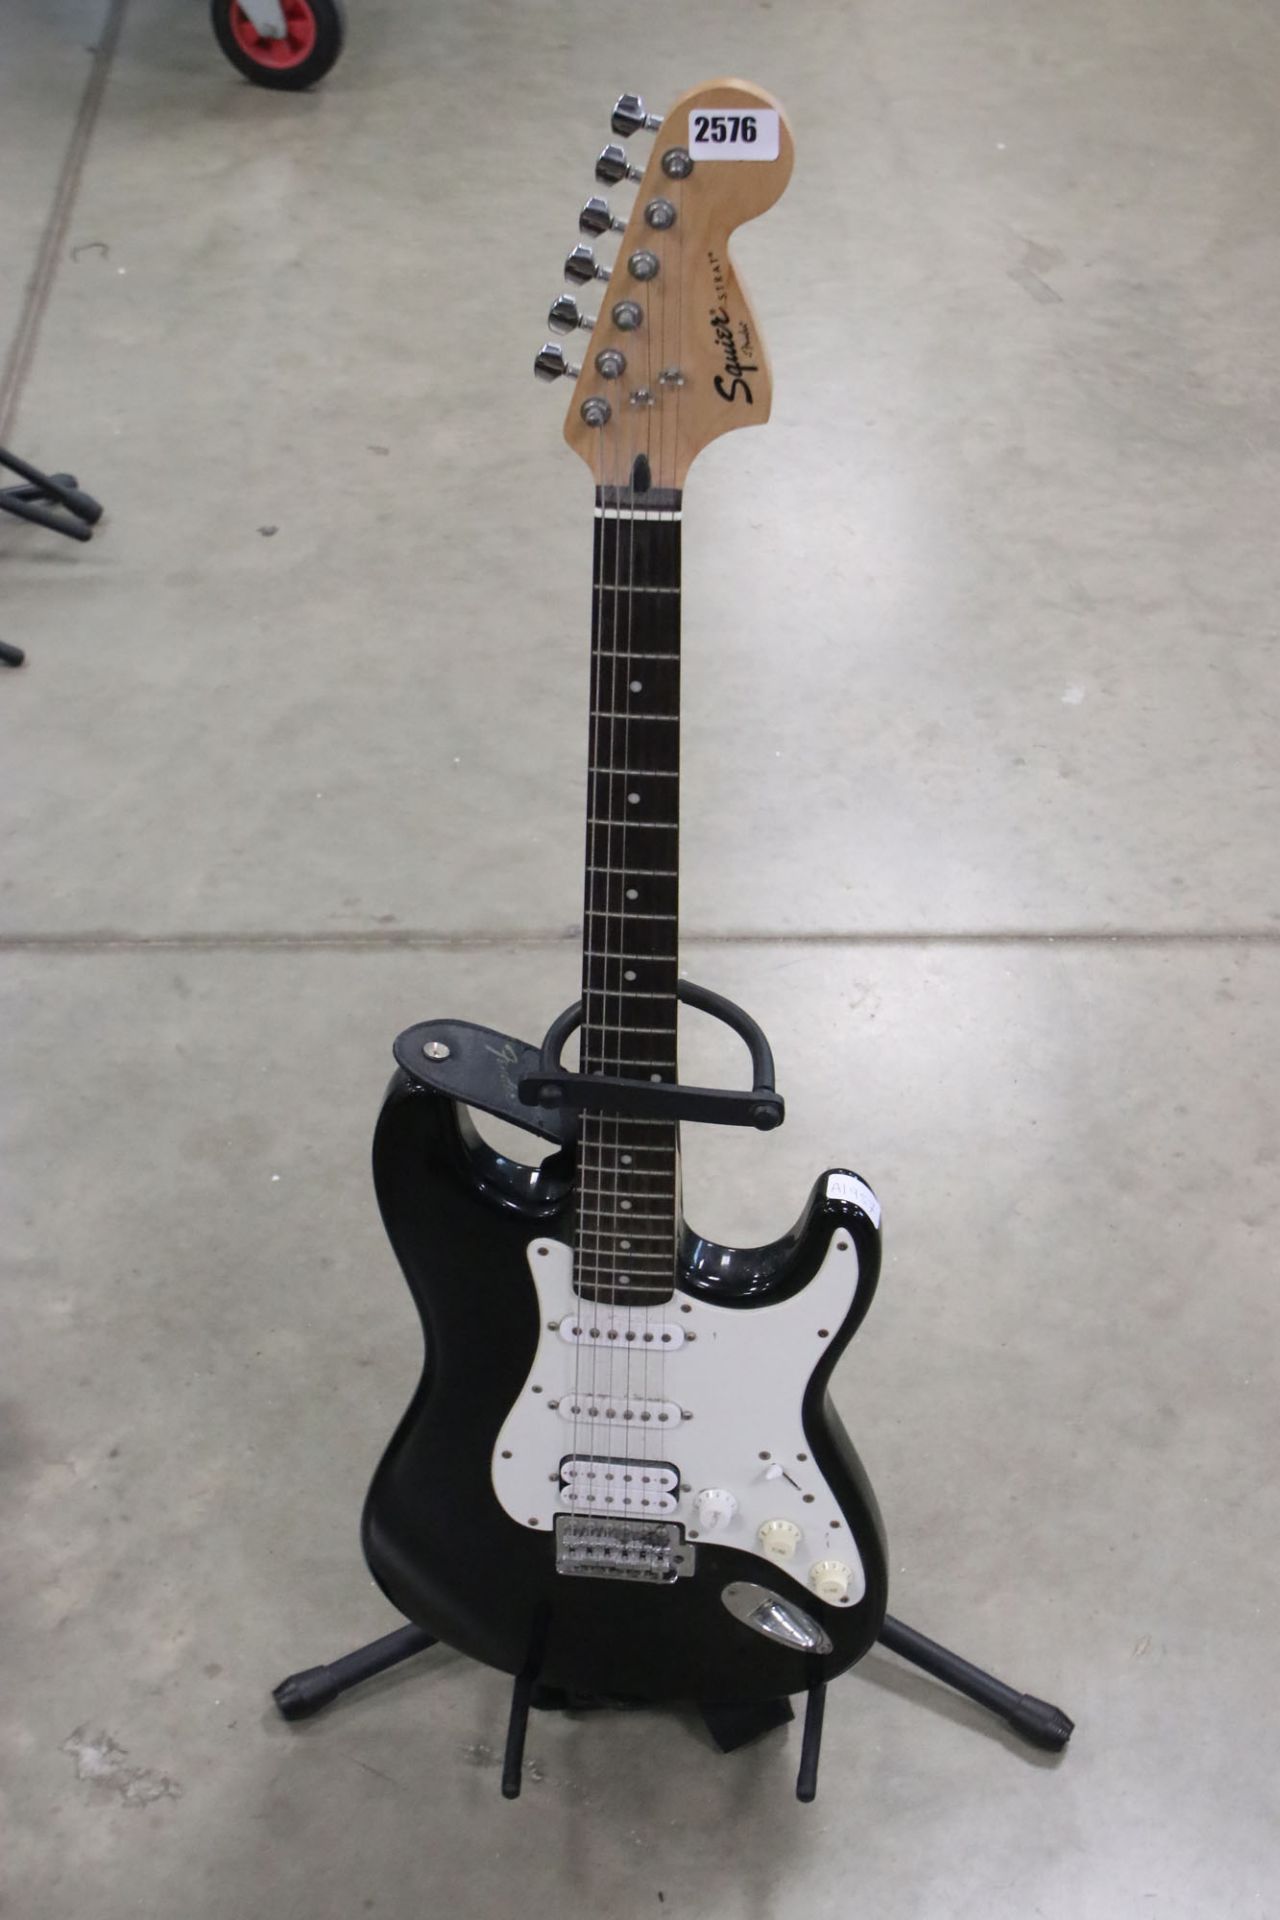 Fender Squire Strat 6-string electric guitar in black and white finish